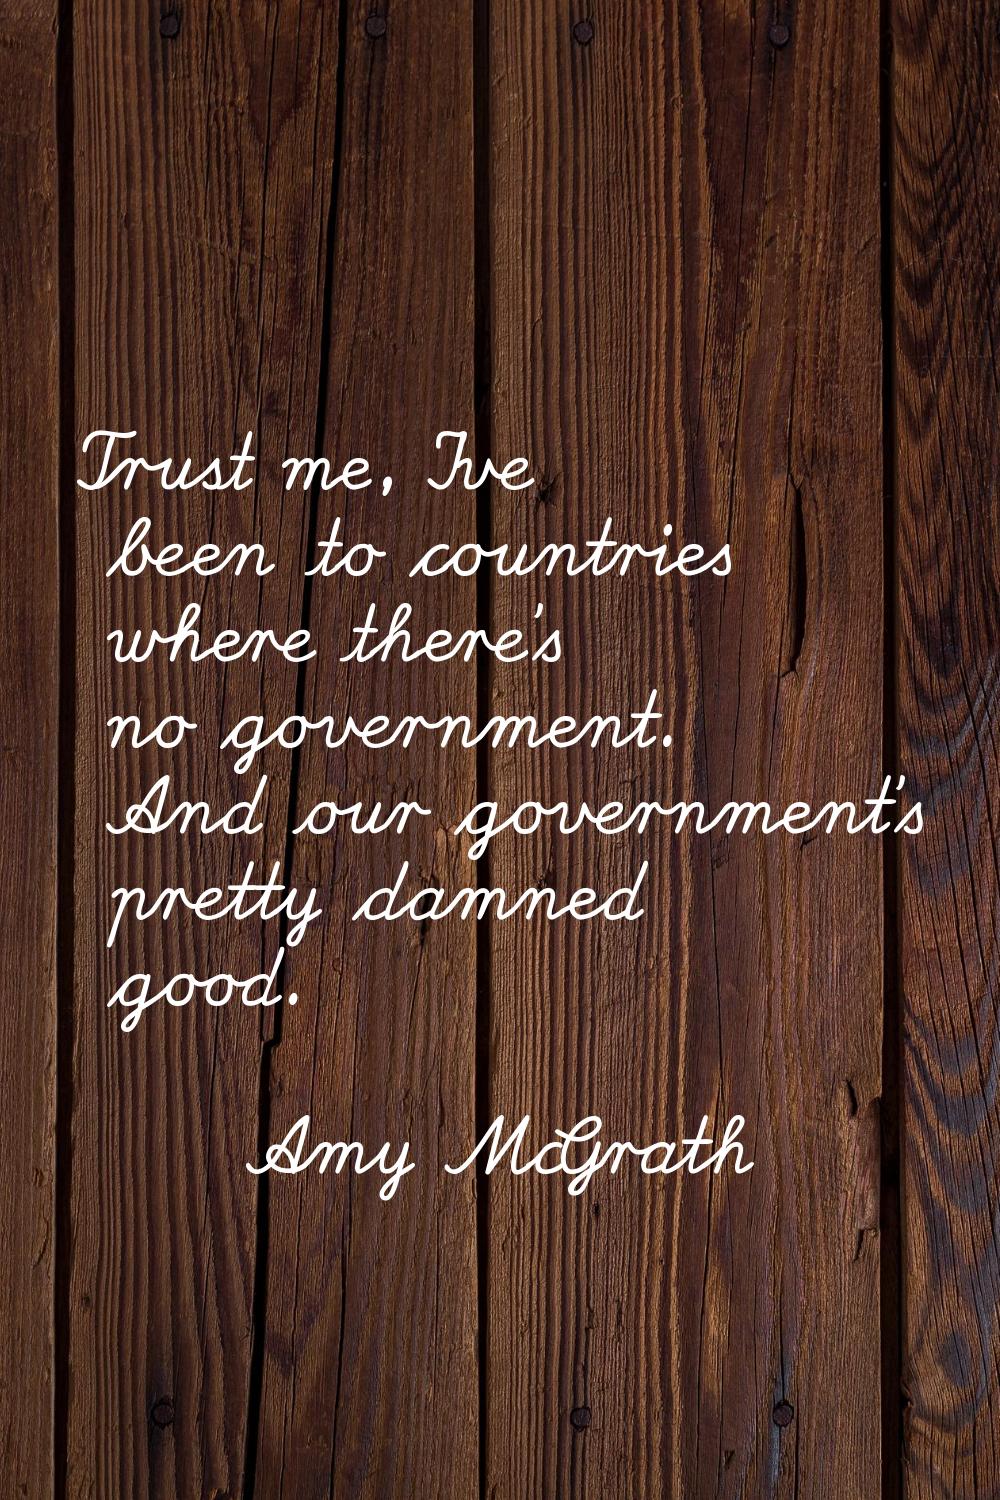 Trust me, I've been to countries where there's no government. And our government's pretty damned go